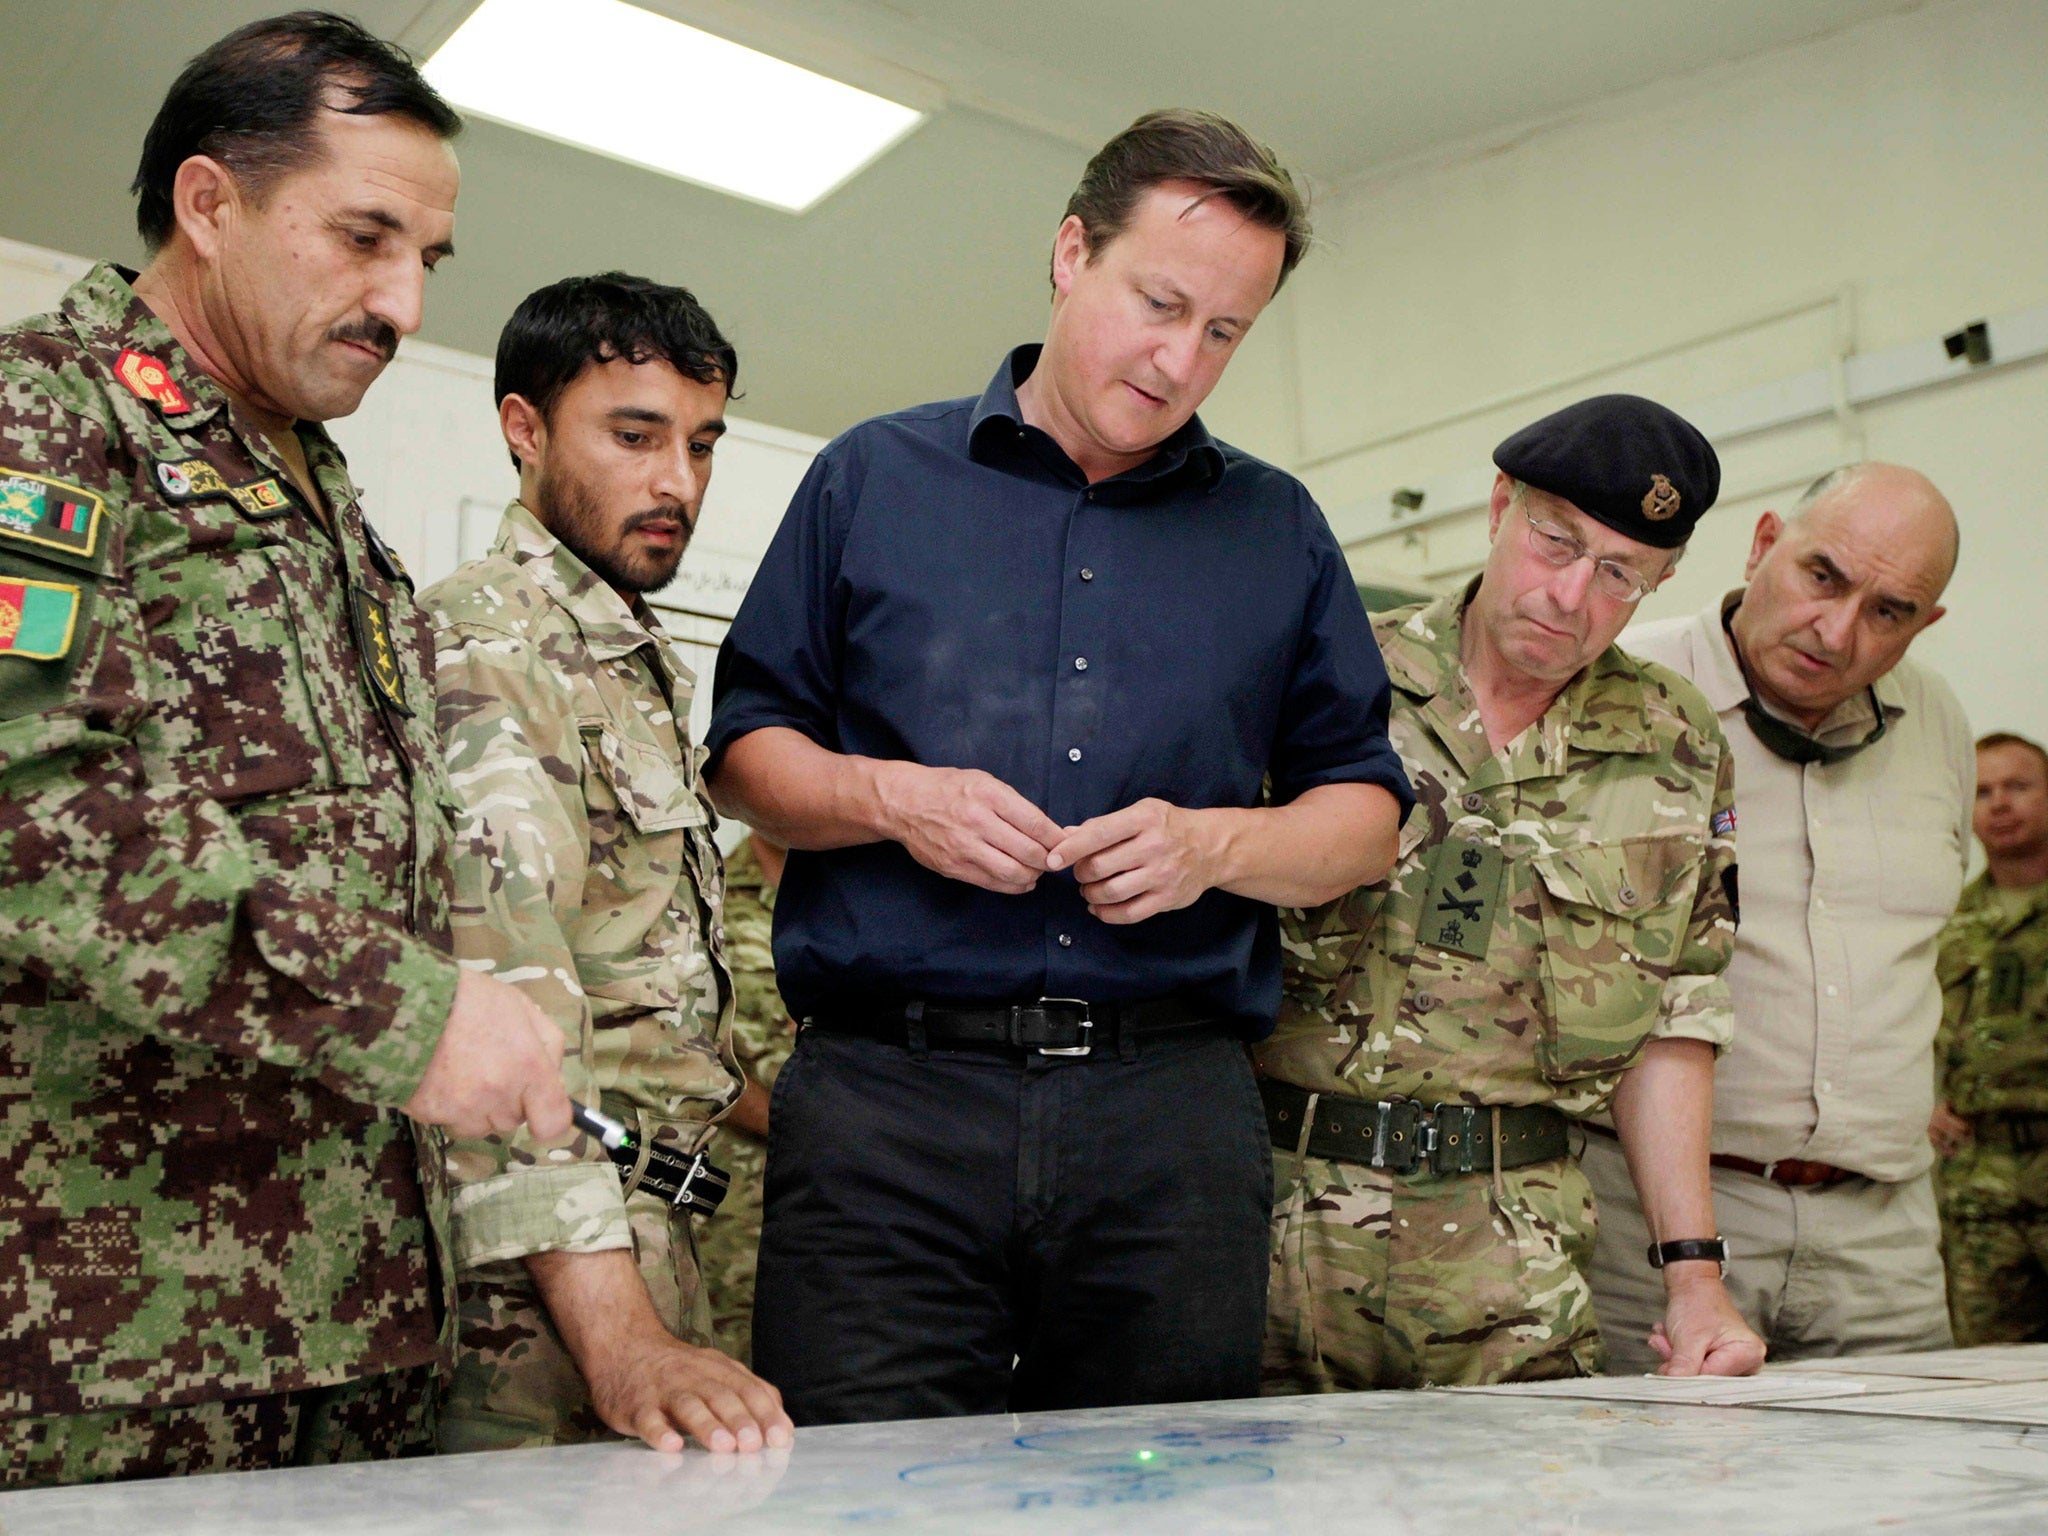 David Cameron visits Helmand Province in 2011